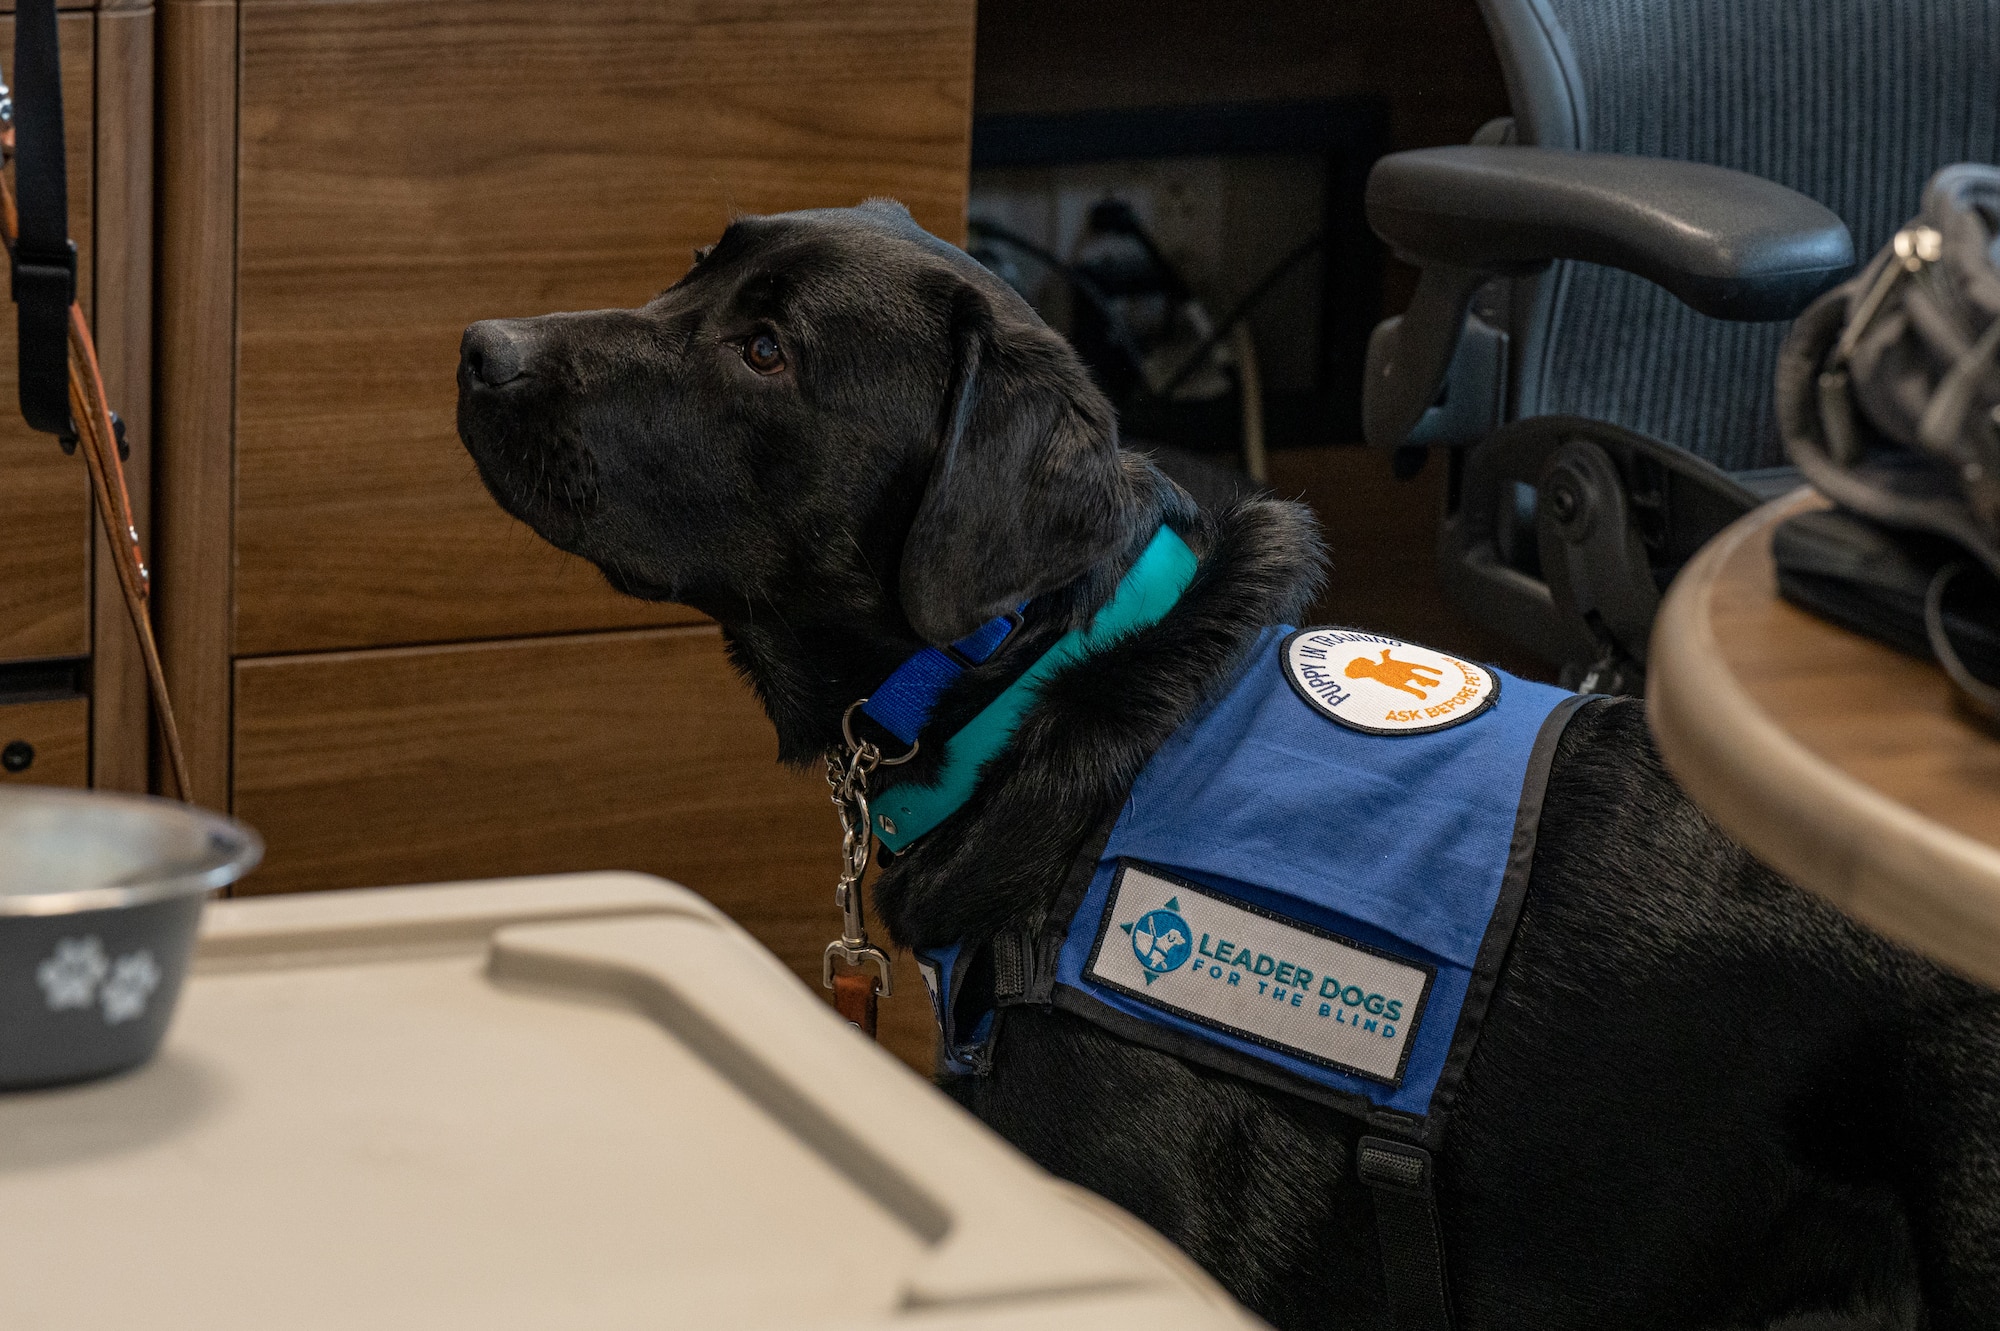 Comet, a guide-dog-in-training, stood in the office at Patrick Space Force Base, Fla., June 8, 2023. Comet’s trainer works in risk analysis for Space Launch Delta 45. (U.S. Space Force photo by Senior Airman Dakota Raub)